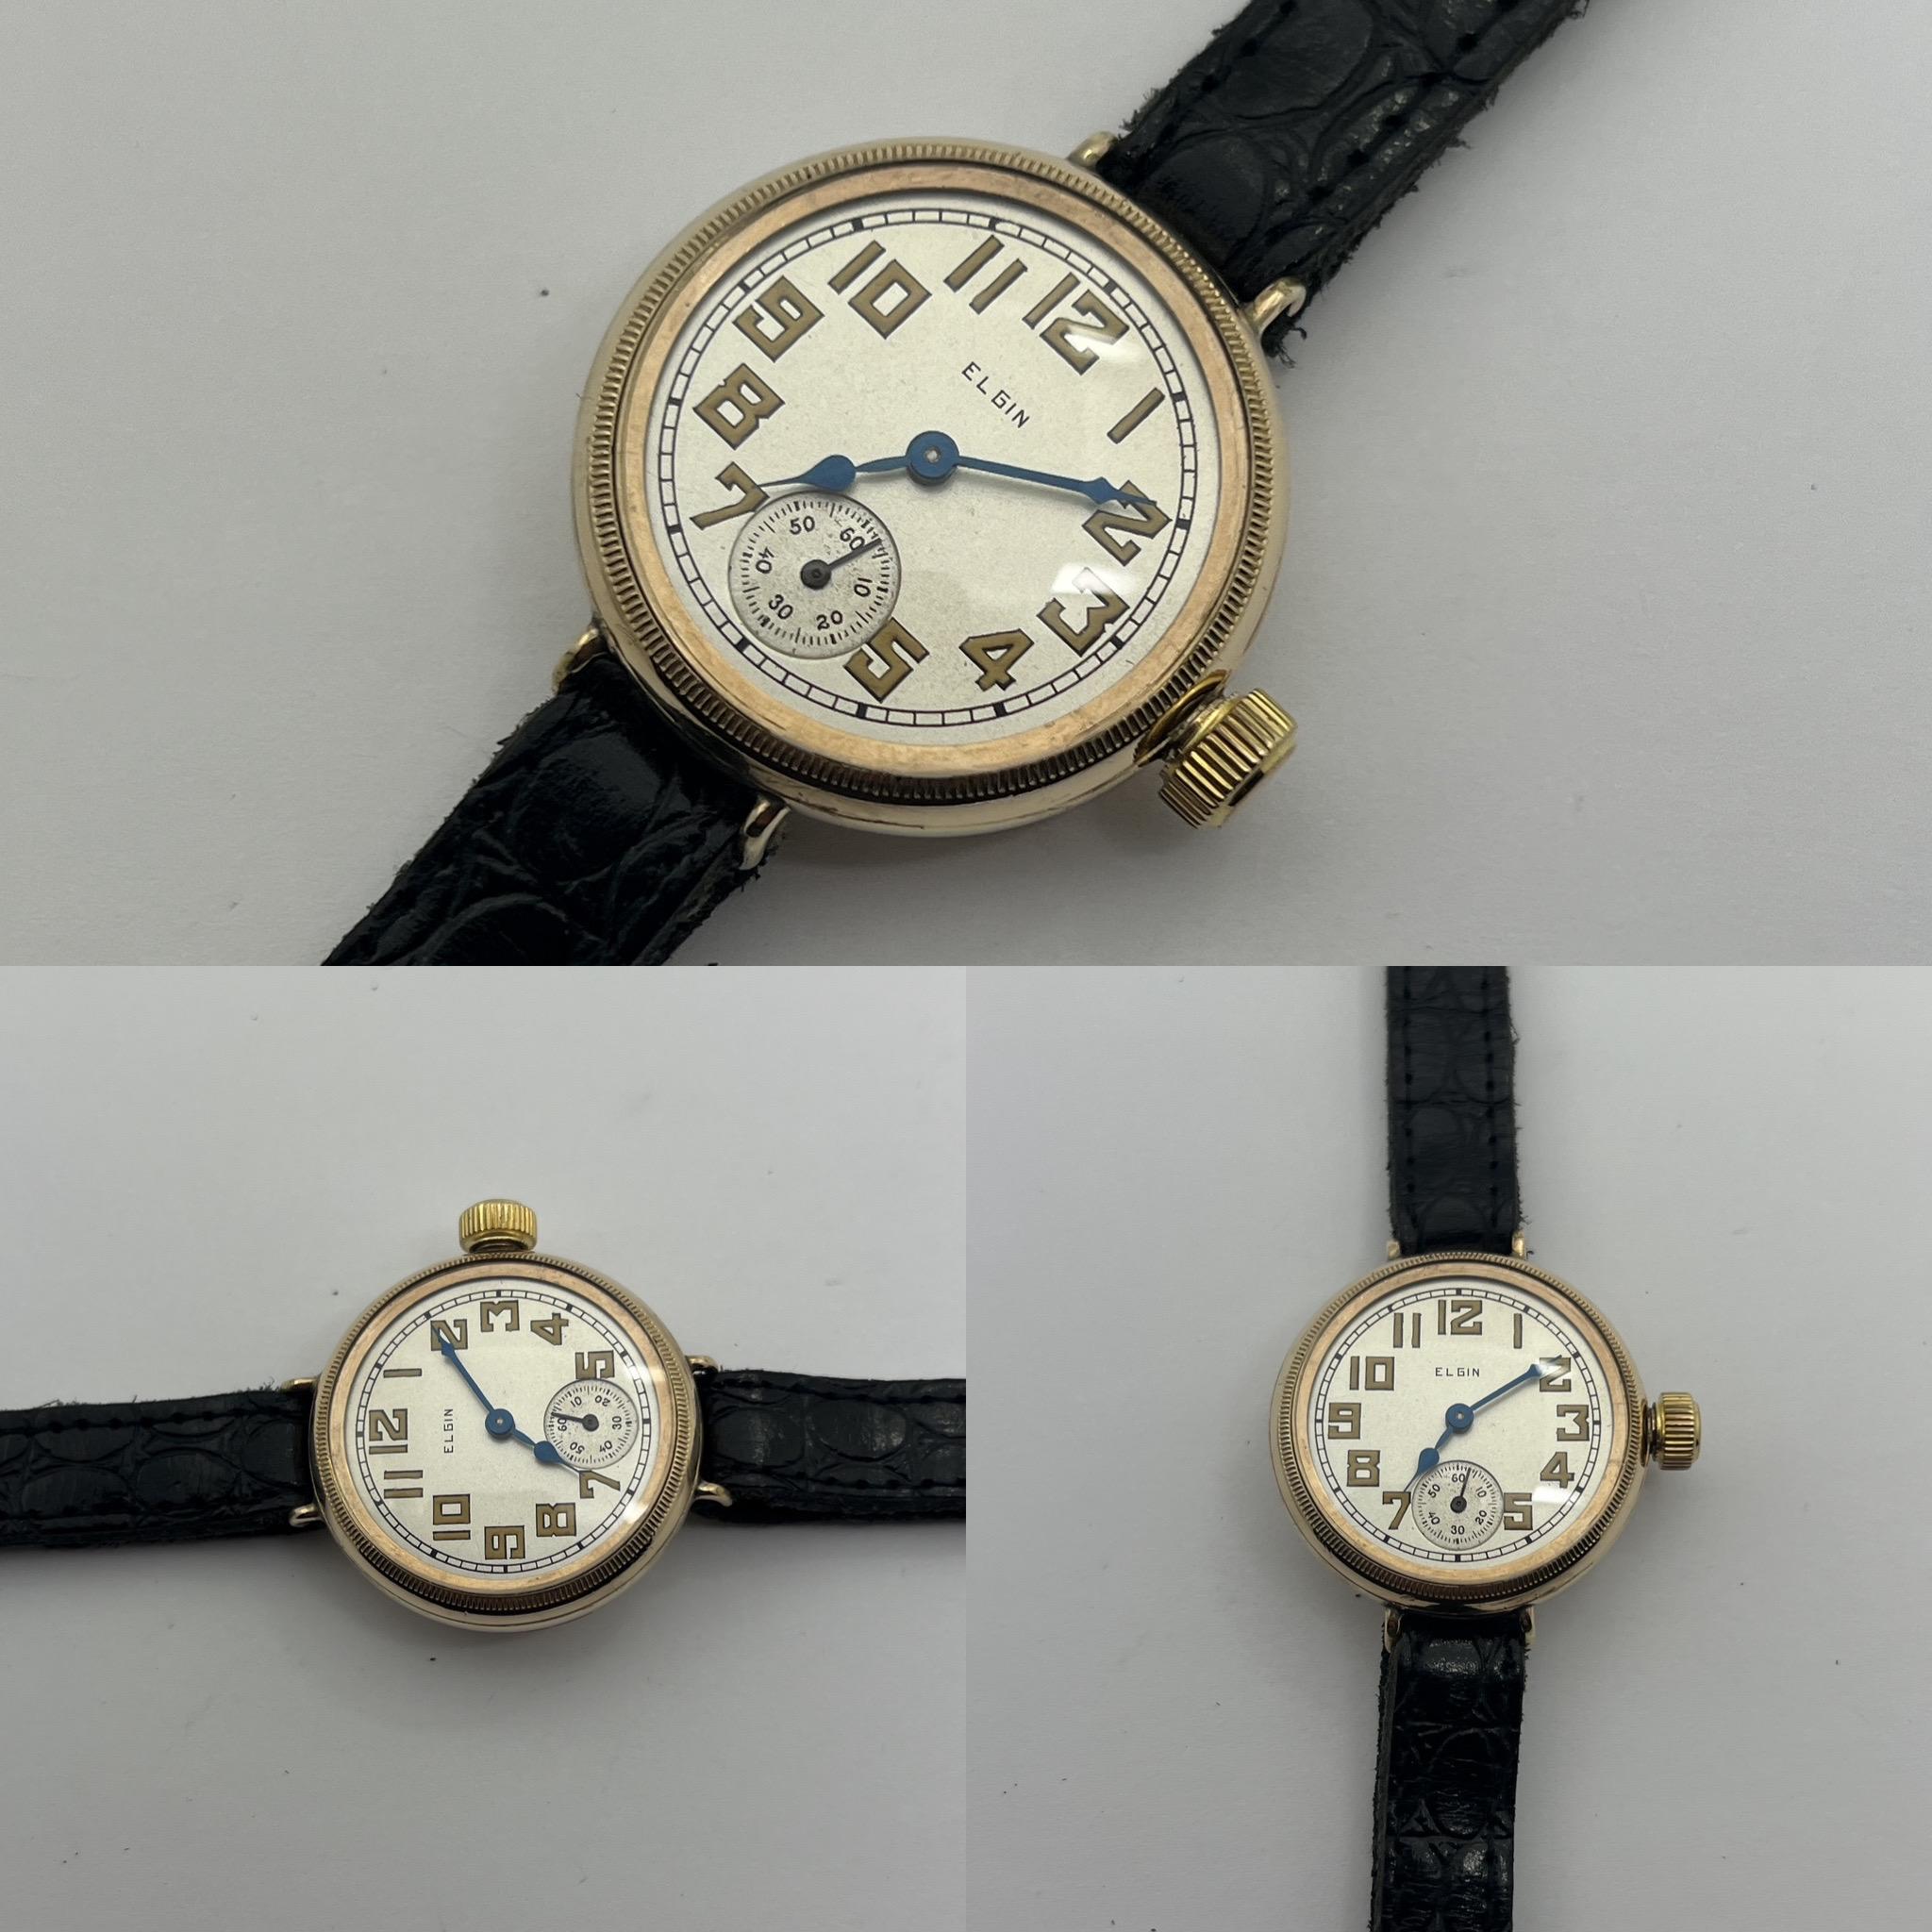 Here is another sublime offering from Vintage Watch Corner. While this could be called a “Trench Watch